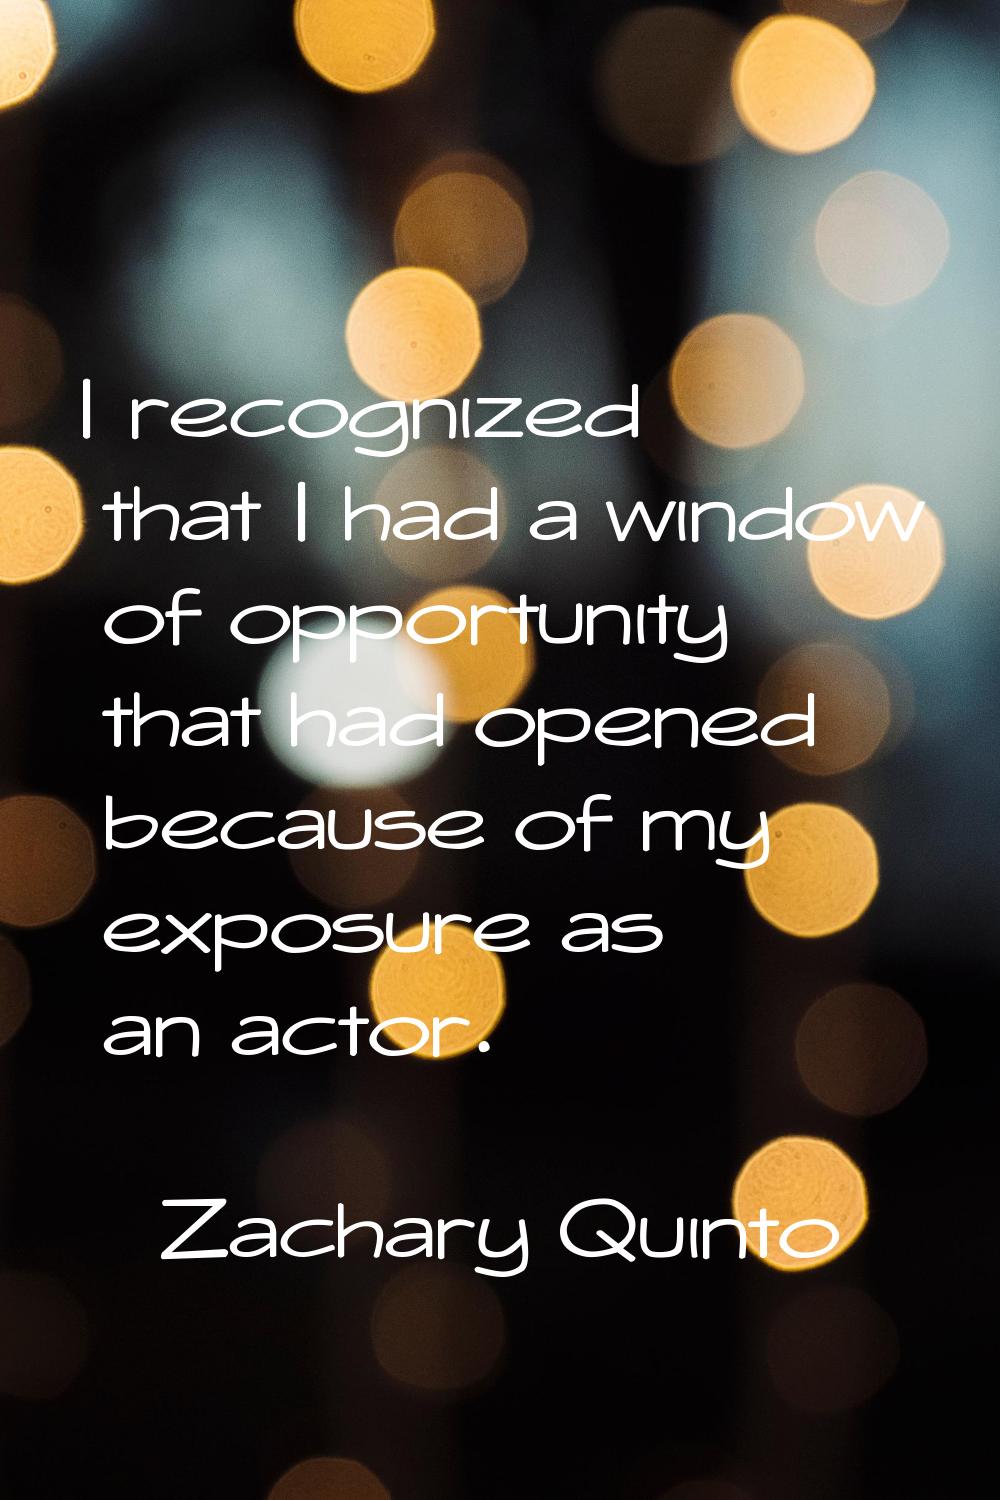 I recognized that I had a window of opportunity that had opened because of my exposure as an actor.